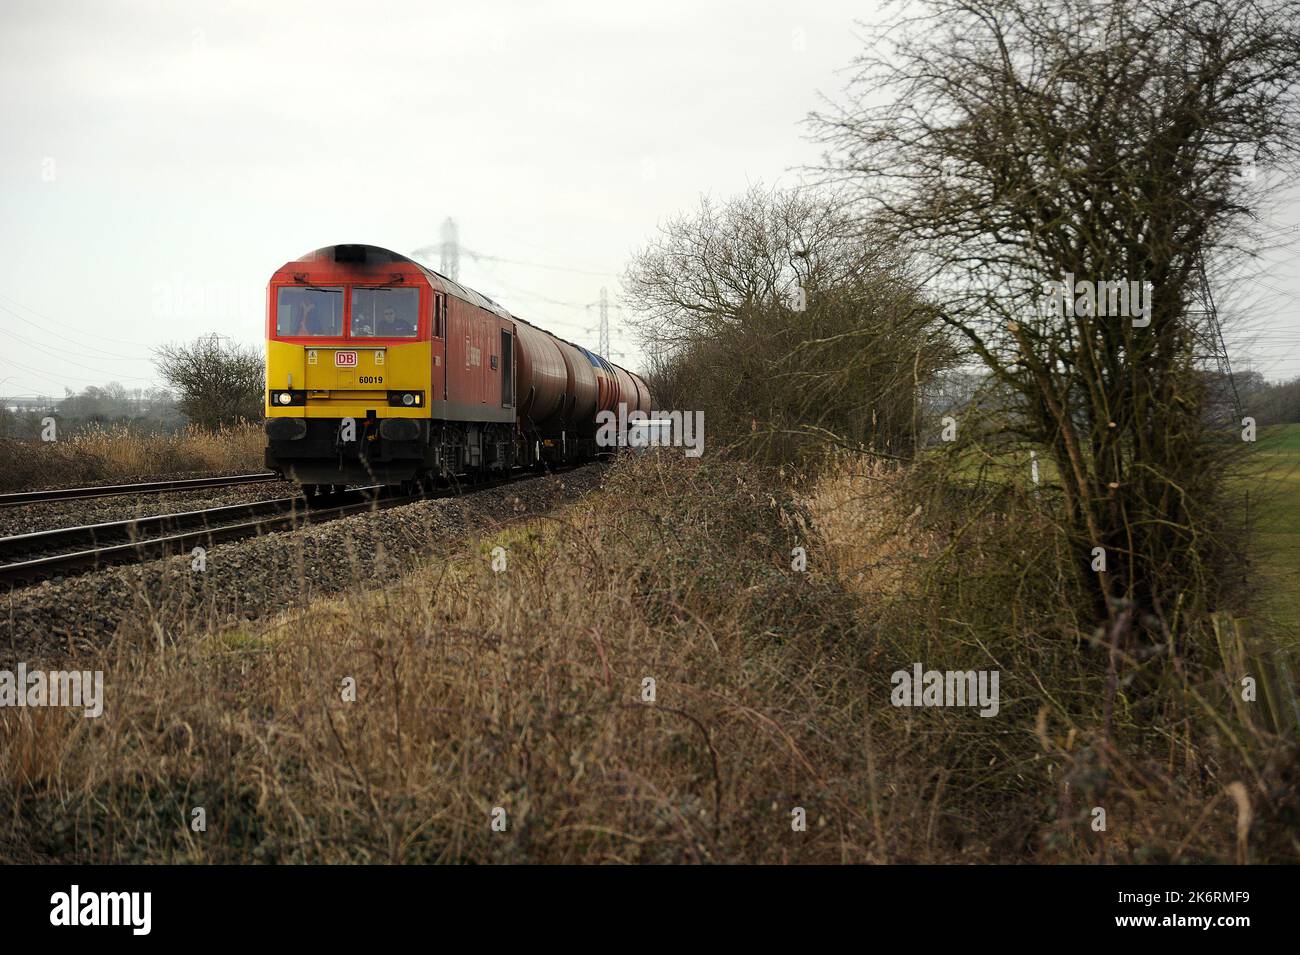 '60019' 'Port of Grimsby & Immingham' east bound near Portskewett with a Robeston - Westerleigh train. Stock Photo